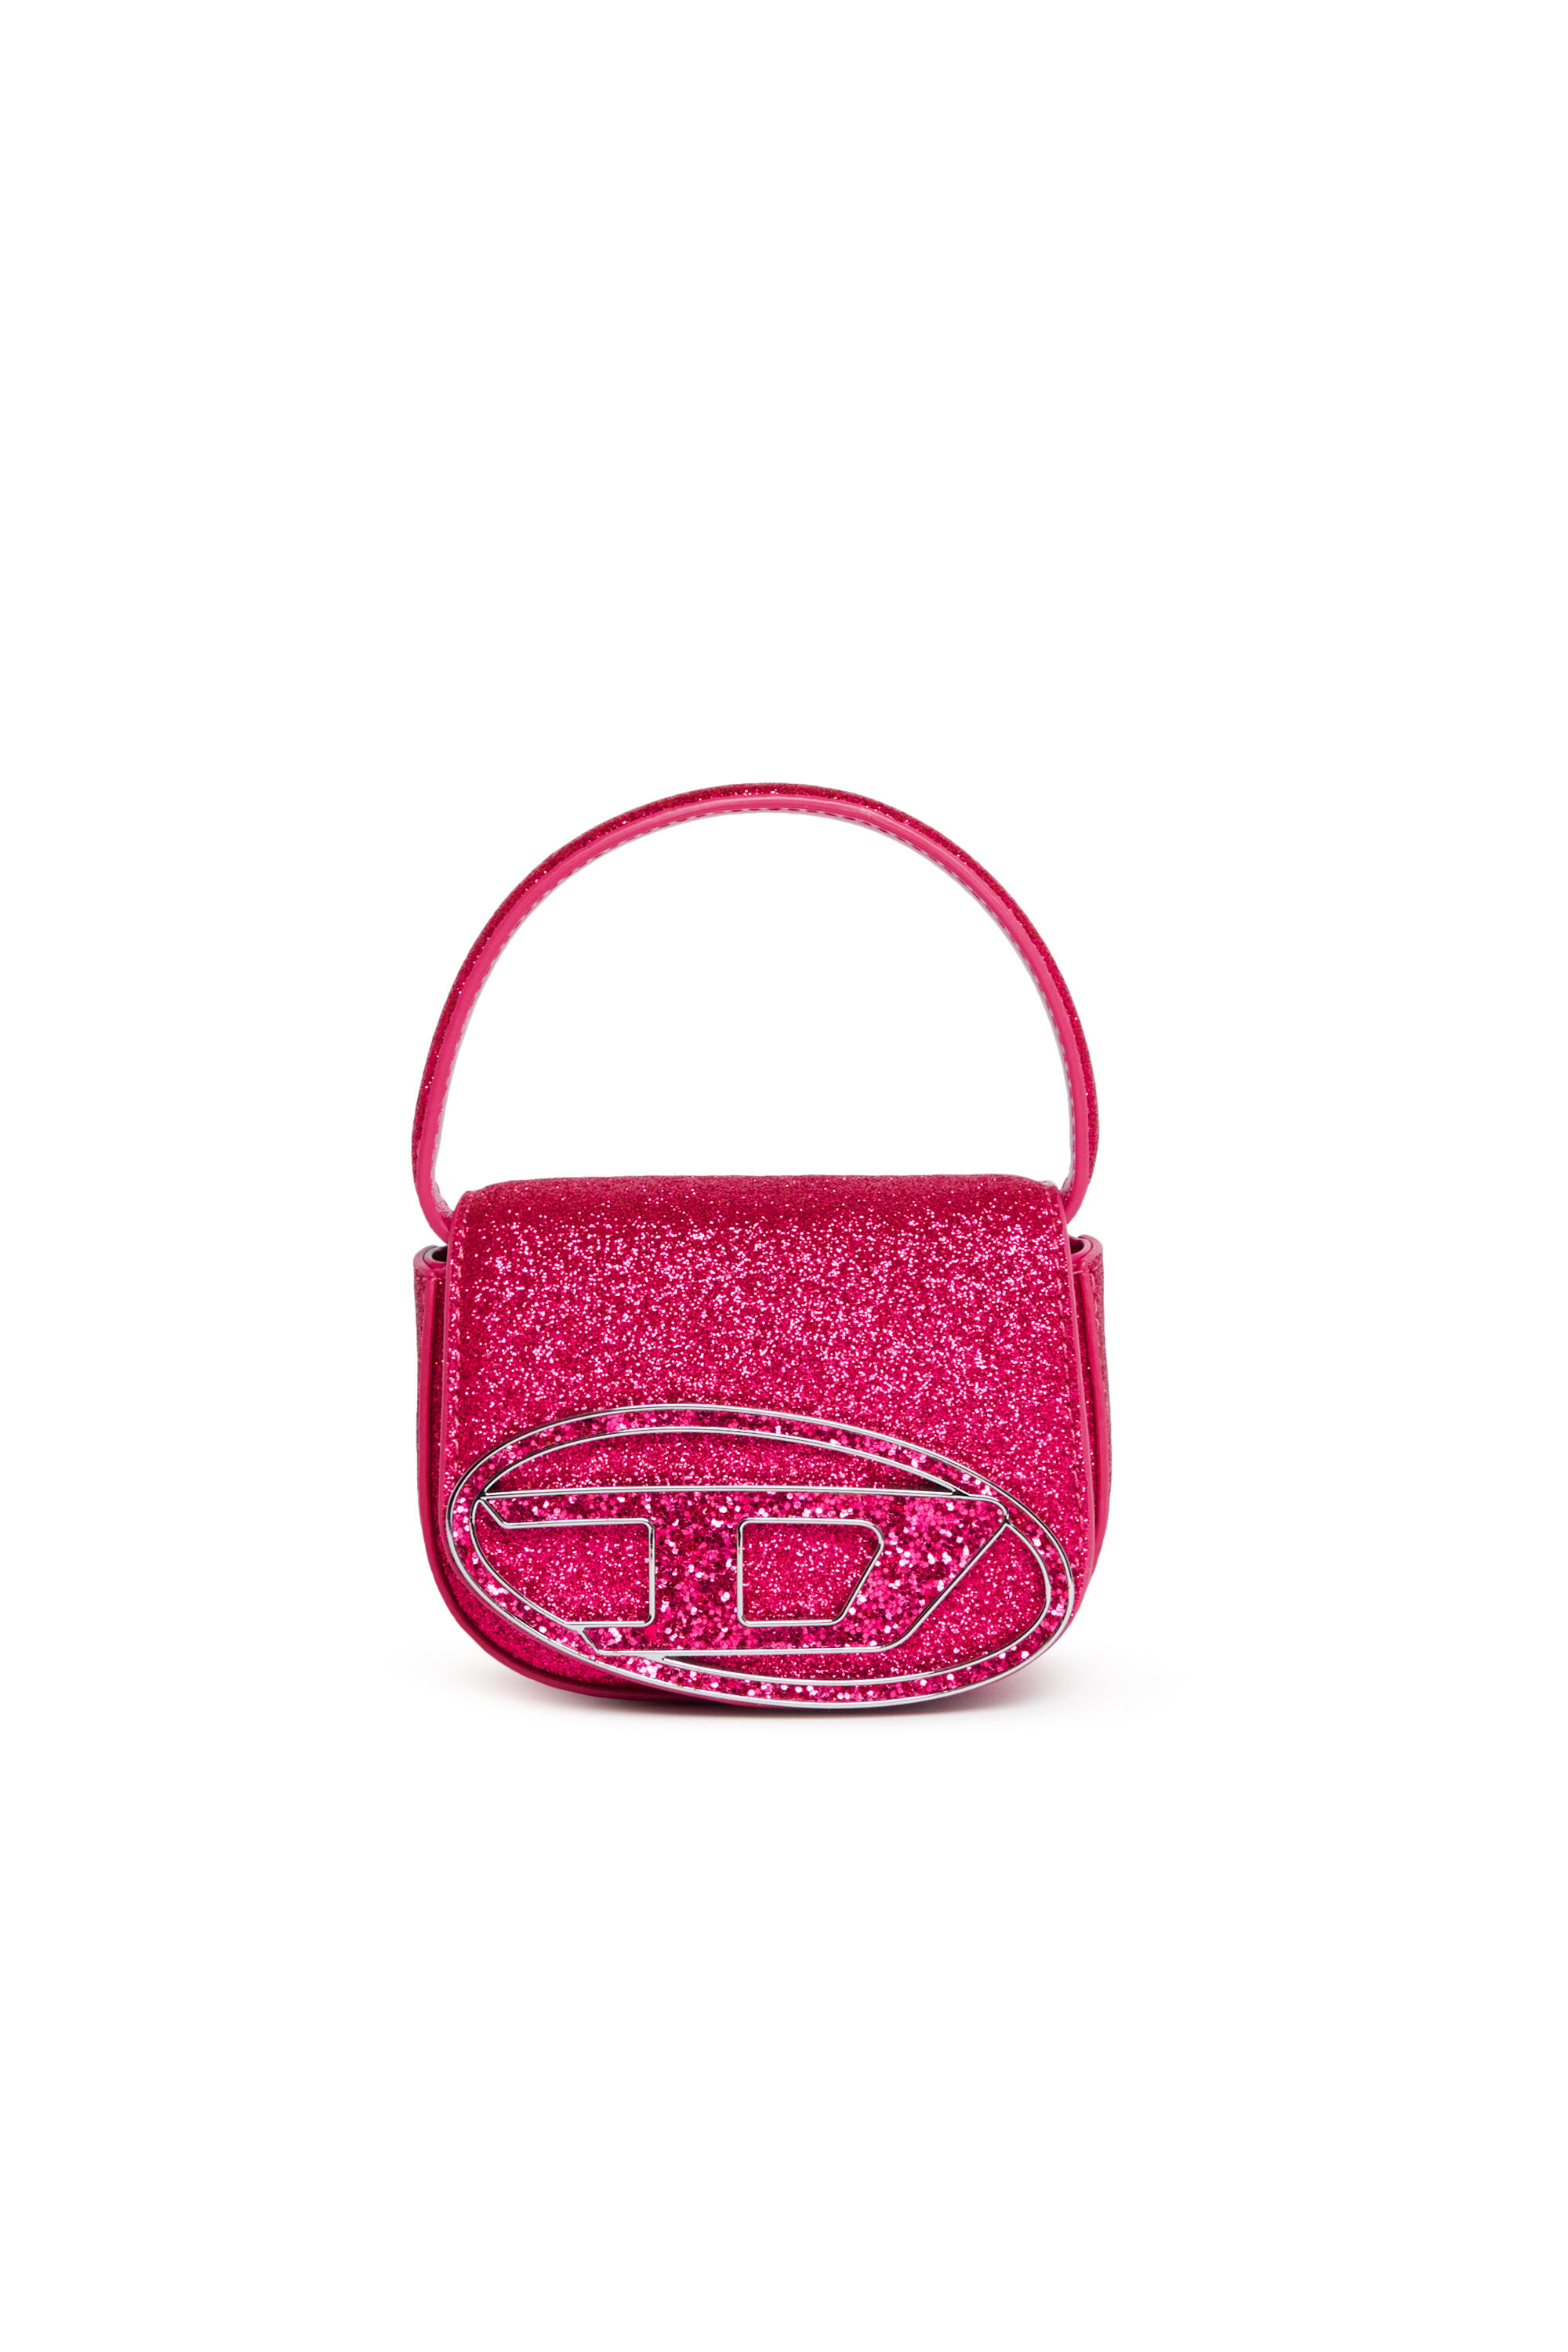 Diesel - 1DR XS, Woman Iconic mini bag in glitter fabric in Pink - Image 1